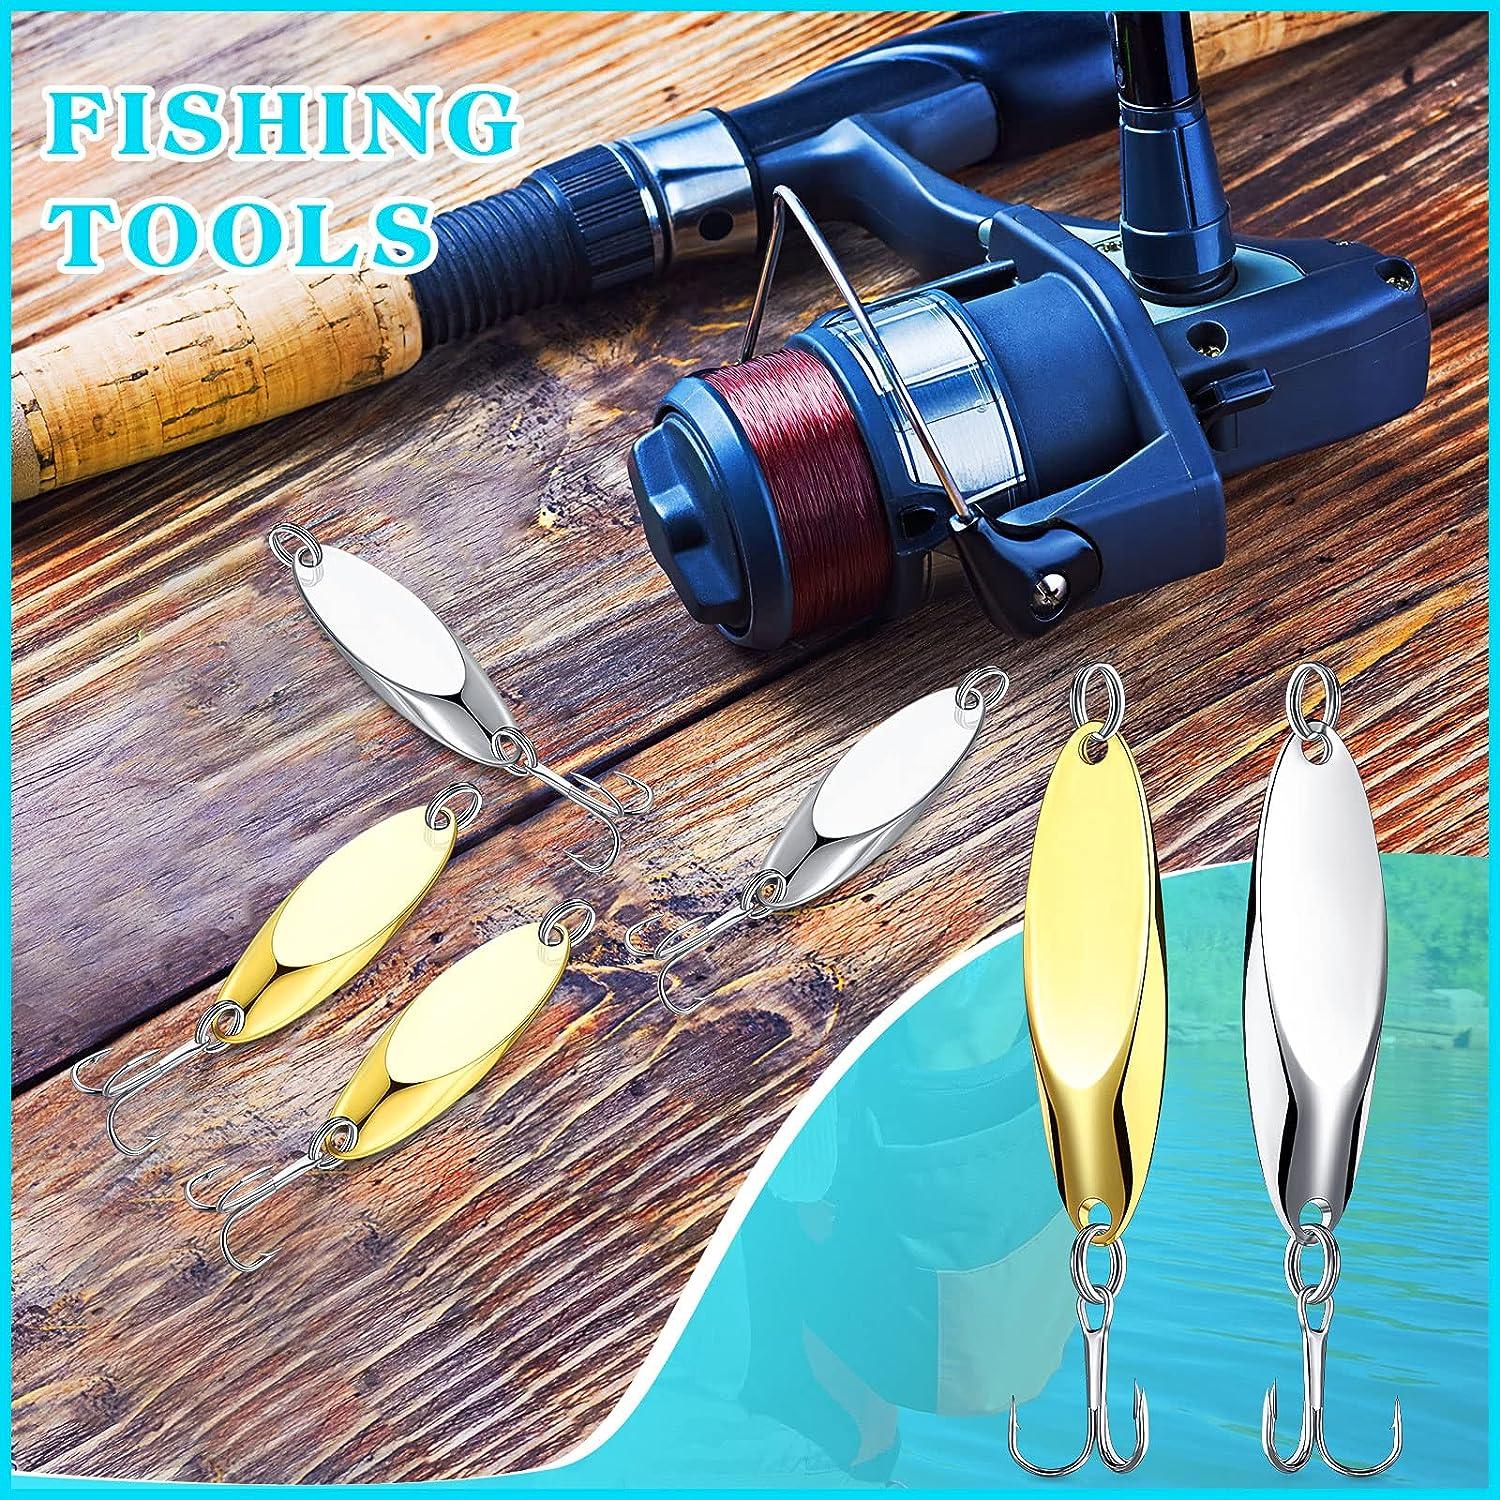  30 Pieces Fishing Spoons Lures, Treble Hooks Fishing Spoons  Hard Metal Spoon Lures Spoons Gold Silver For Huge Distance Cast Saltwater Freshwater  Fishing In 1/5 Oz 1/4 Oz 3/8 Oz 1/2 Oz 3/4 Oz